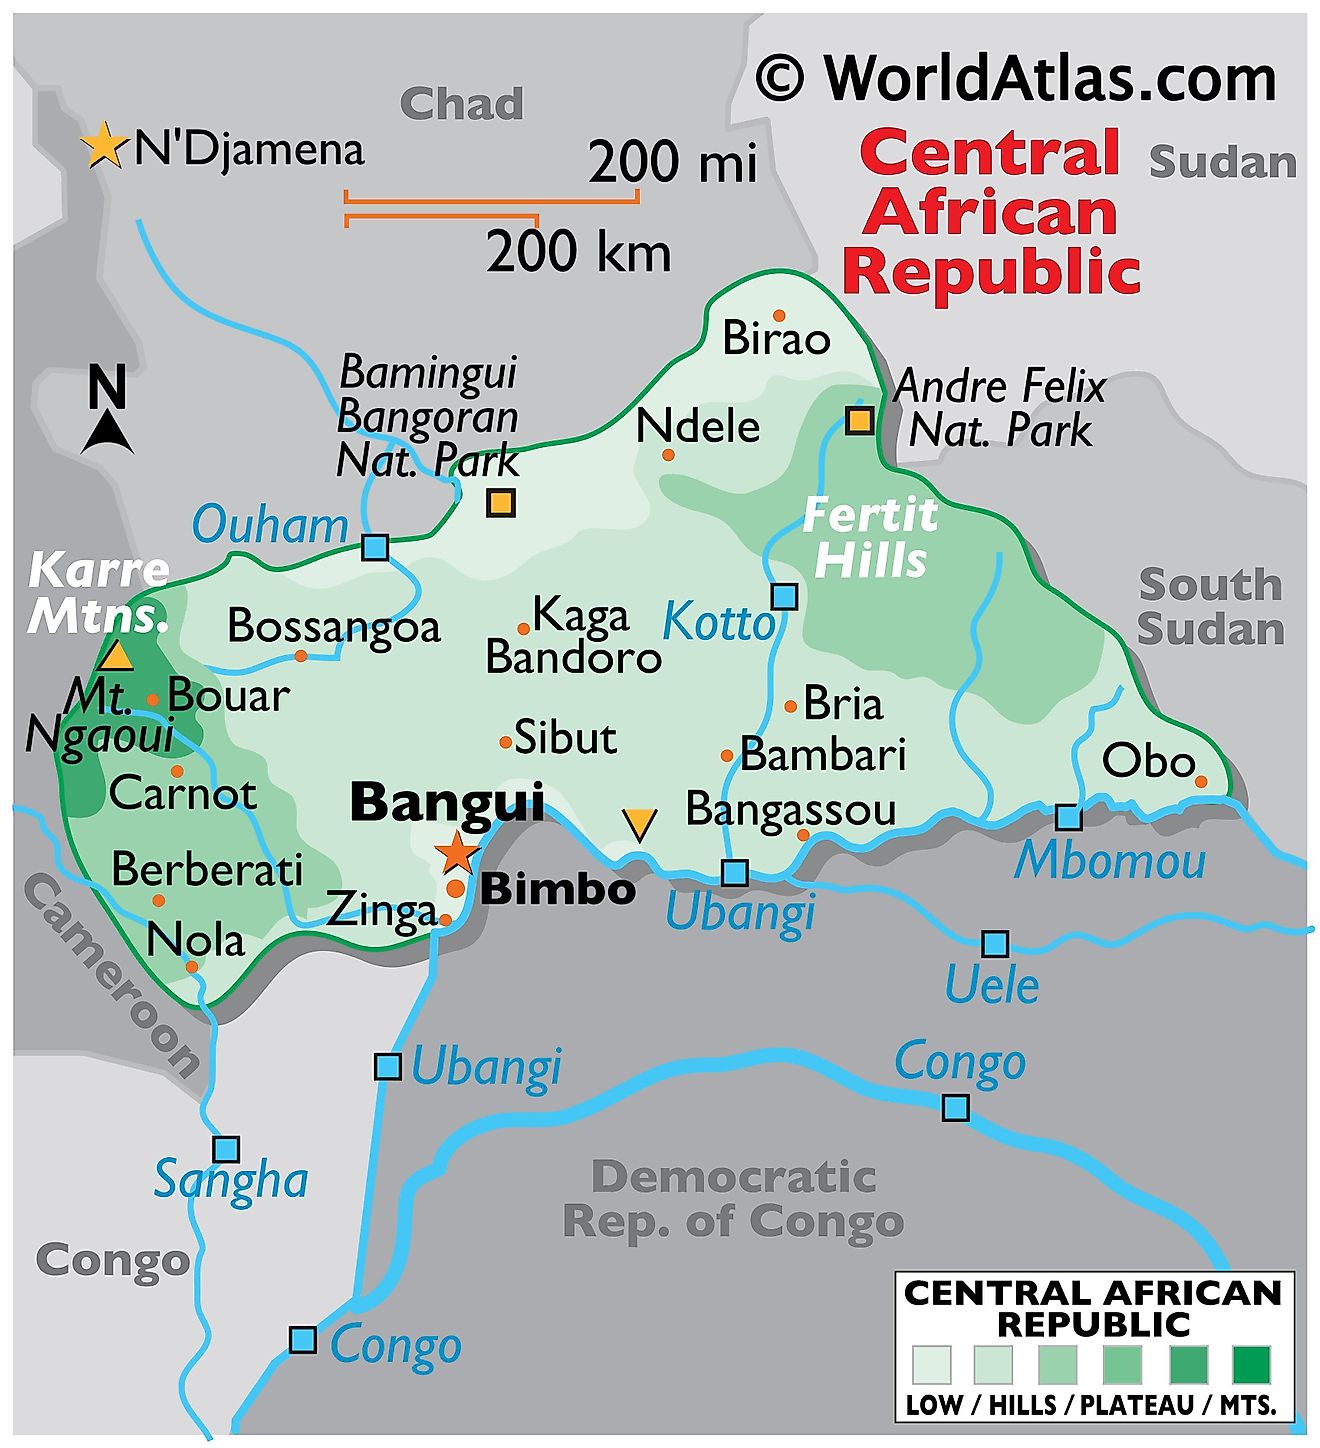 Physical Map of Central African Republic showing state boundaries, relief, major rivers, extreme points, national parks, etc.